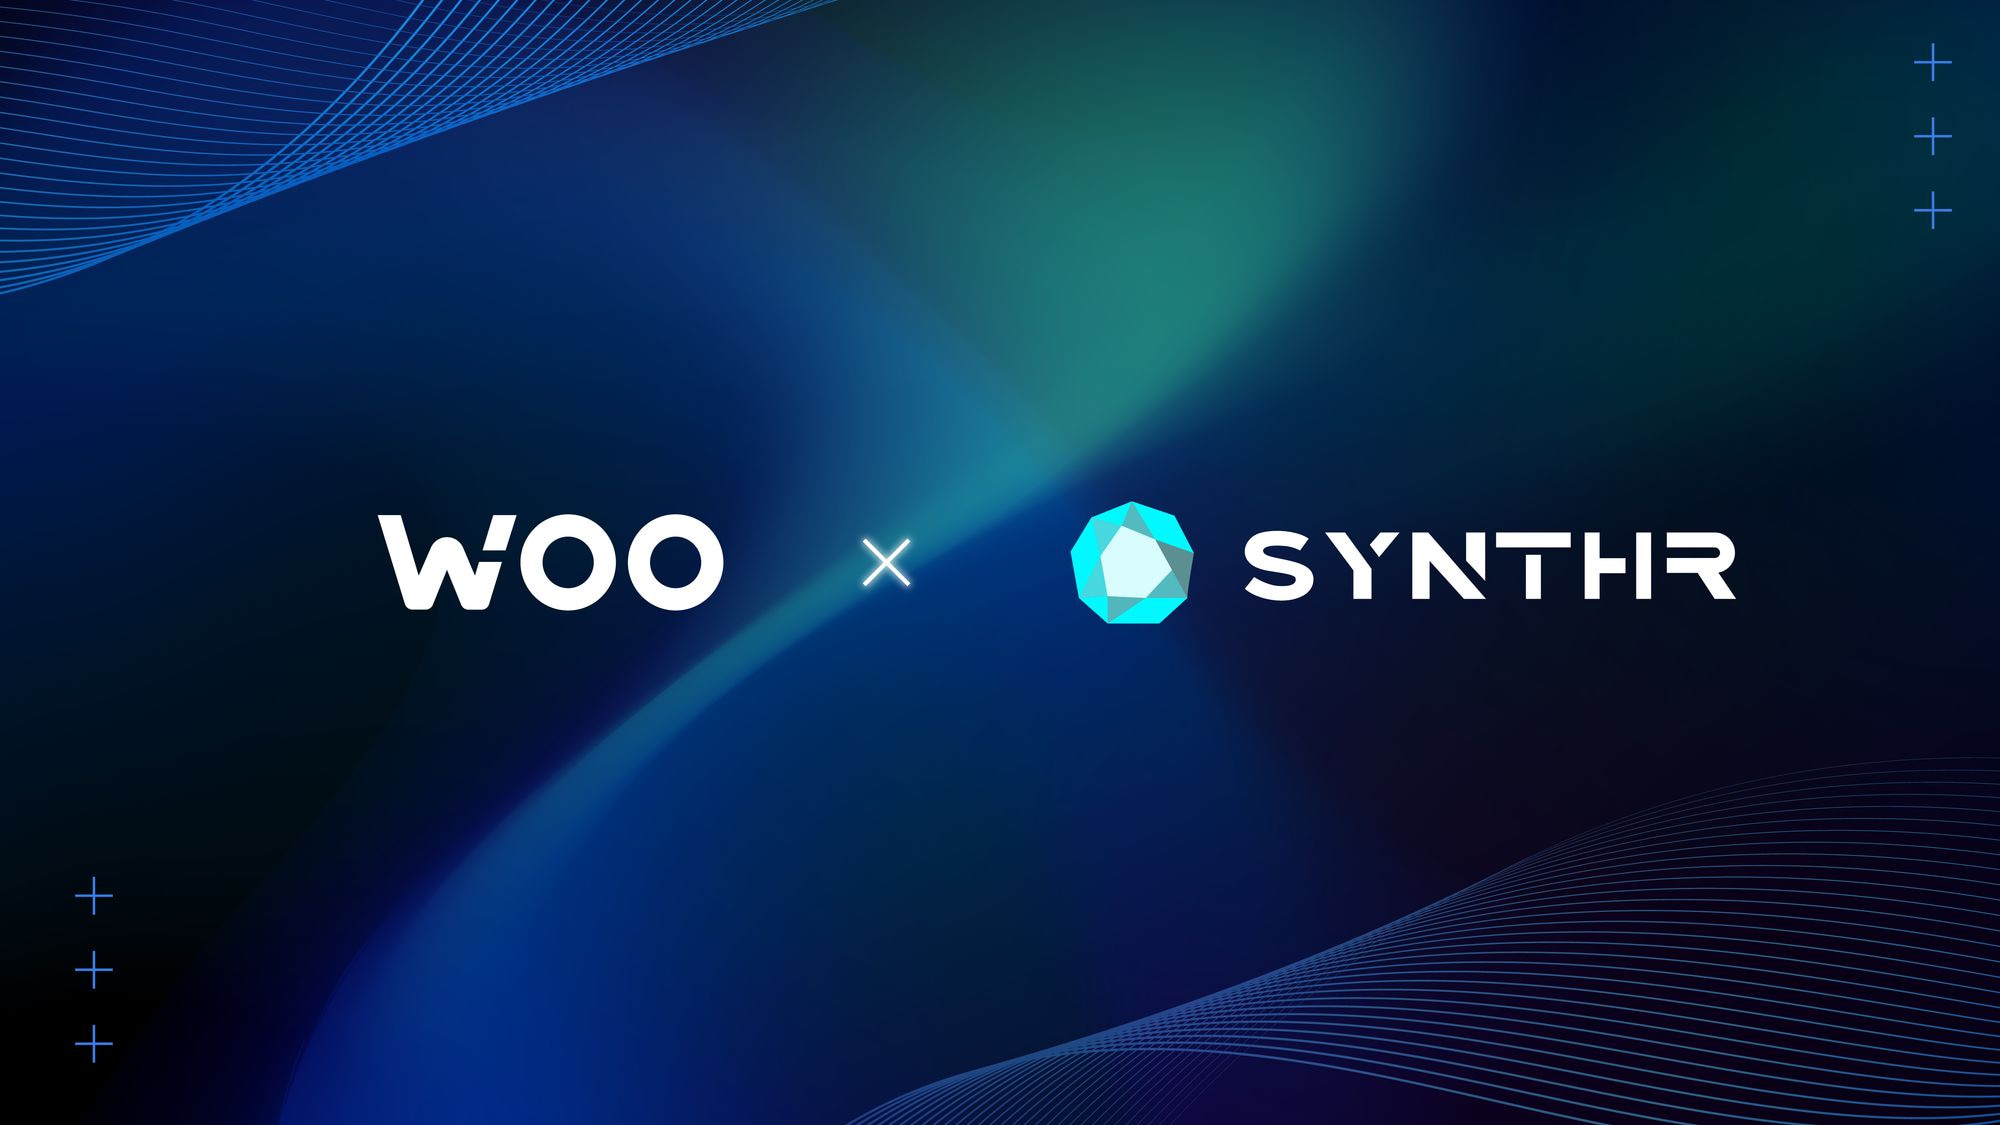 WOO and SYNTHR partner to accelerate an omnichain future